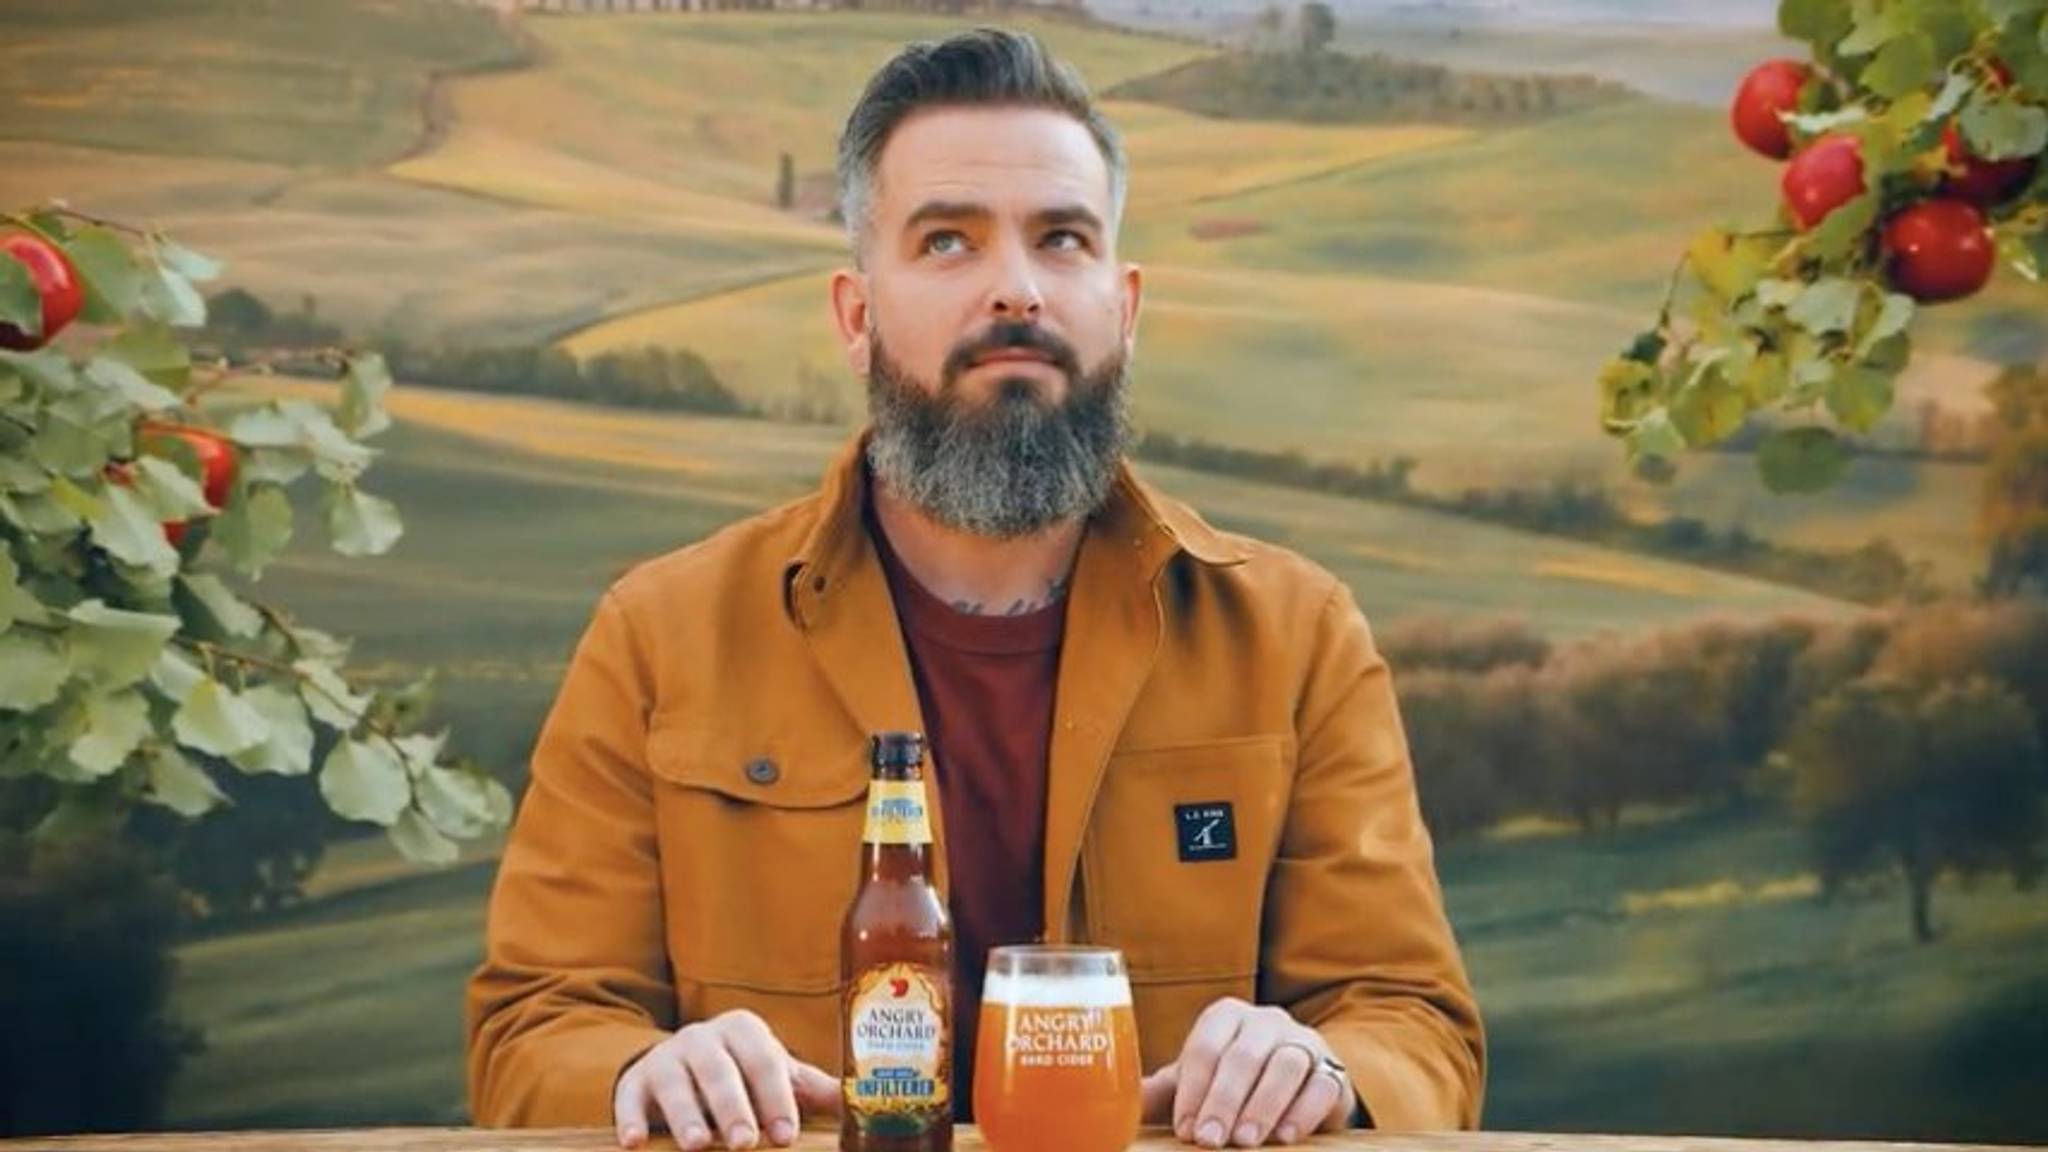 Angry Orchard's 'unfiltered' ad aims for authenticity